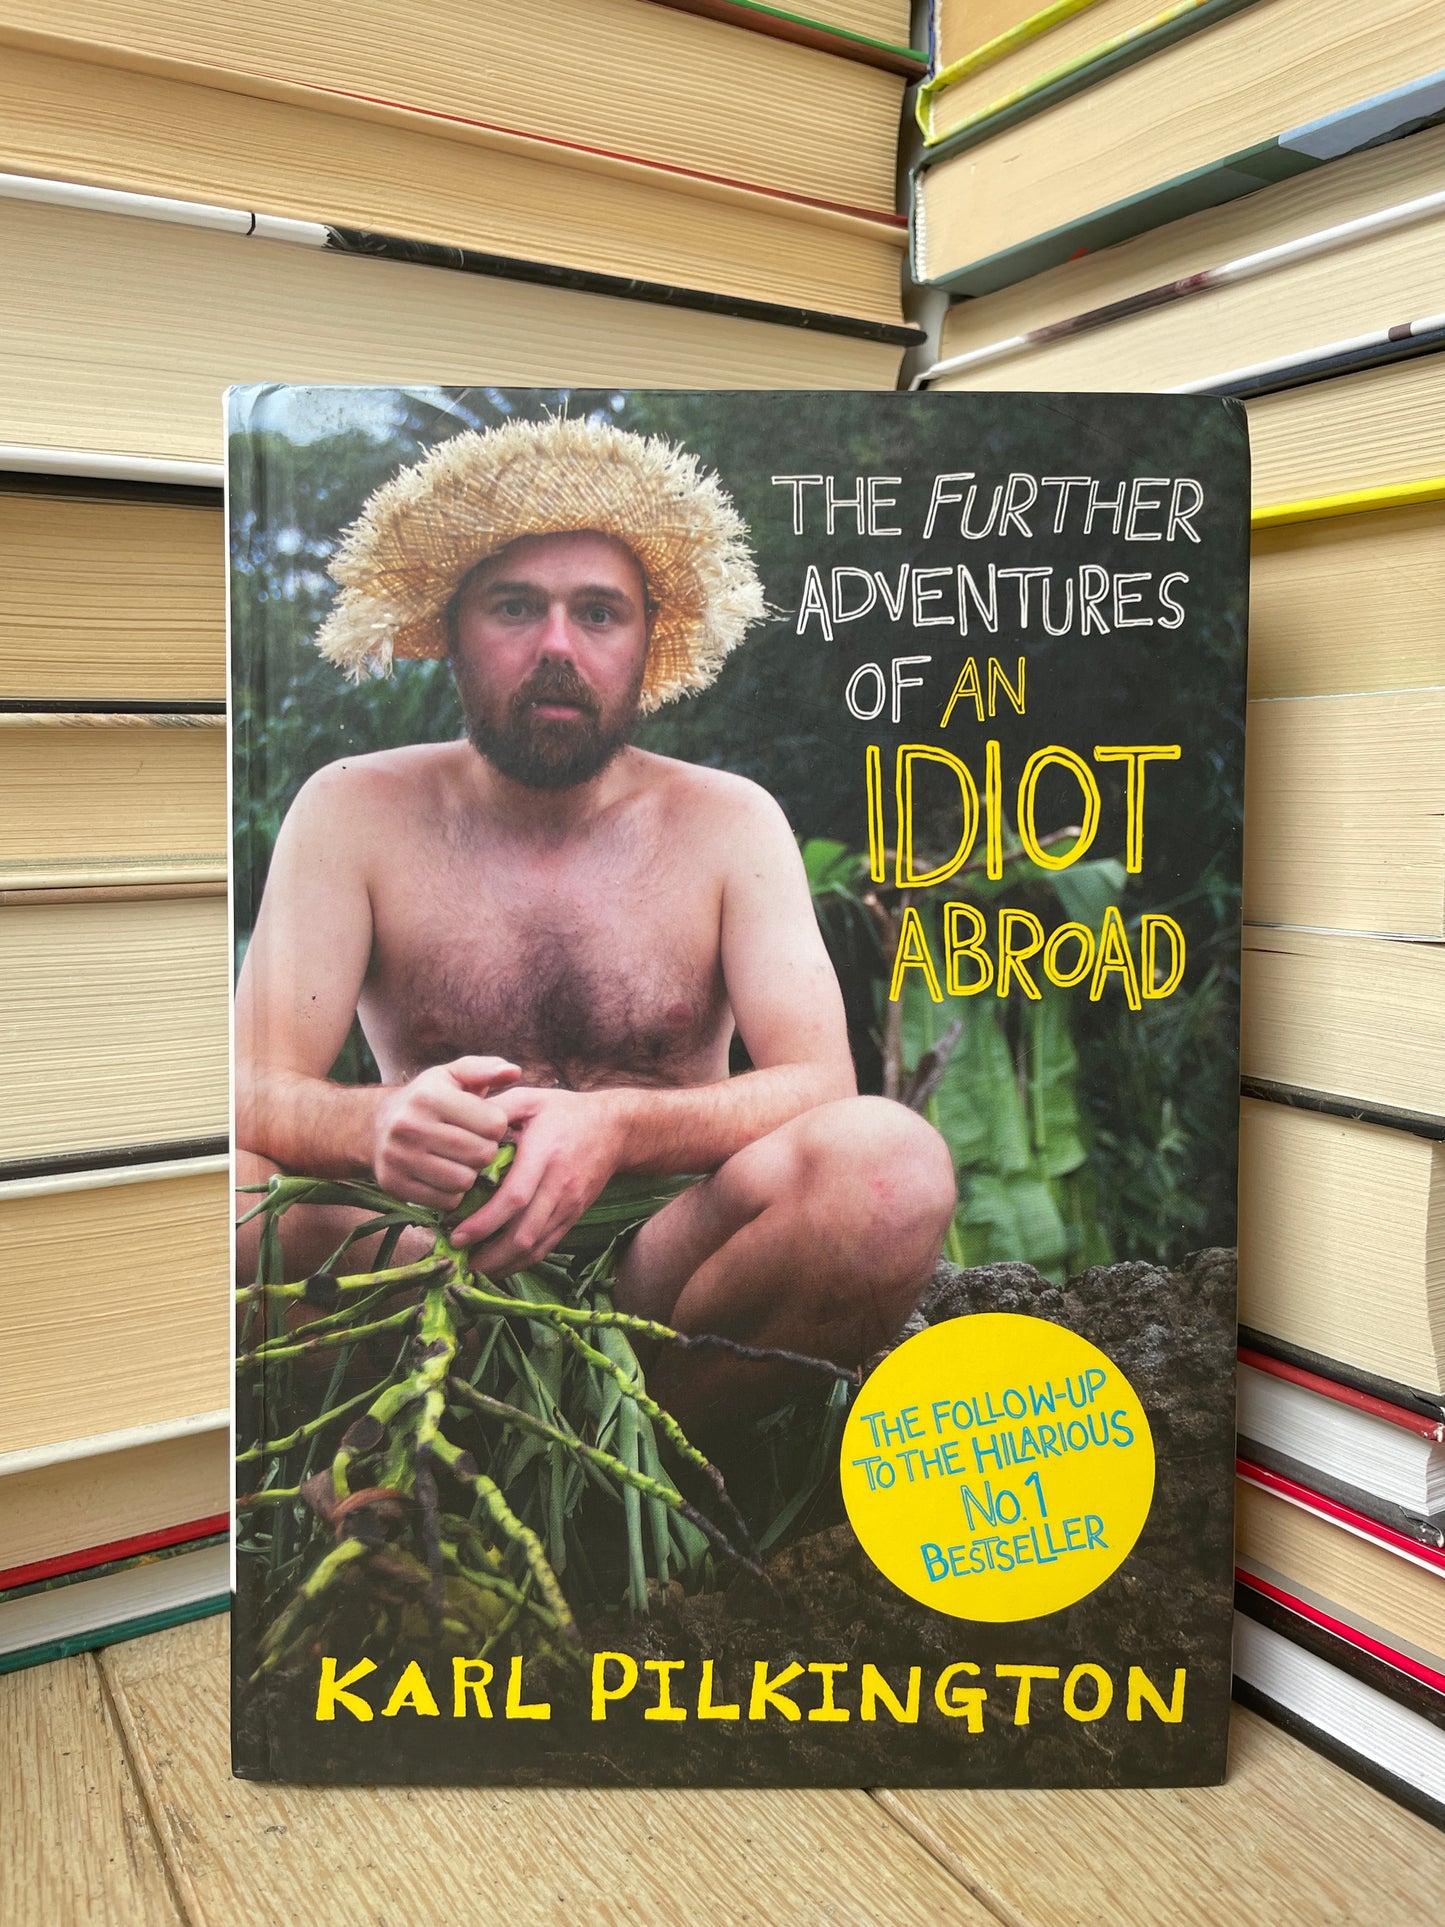 Karl Pilkington - The Further Adventures of an Idiot Abroad